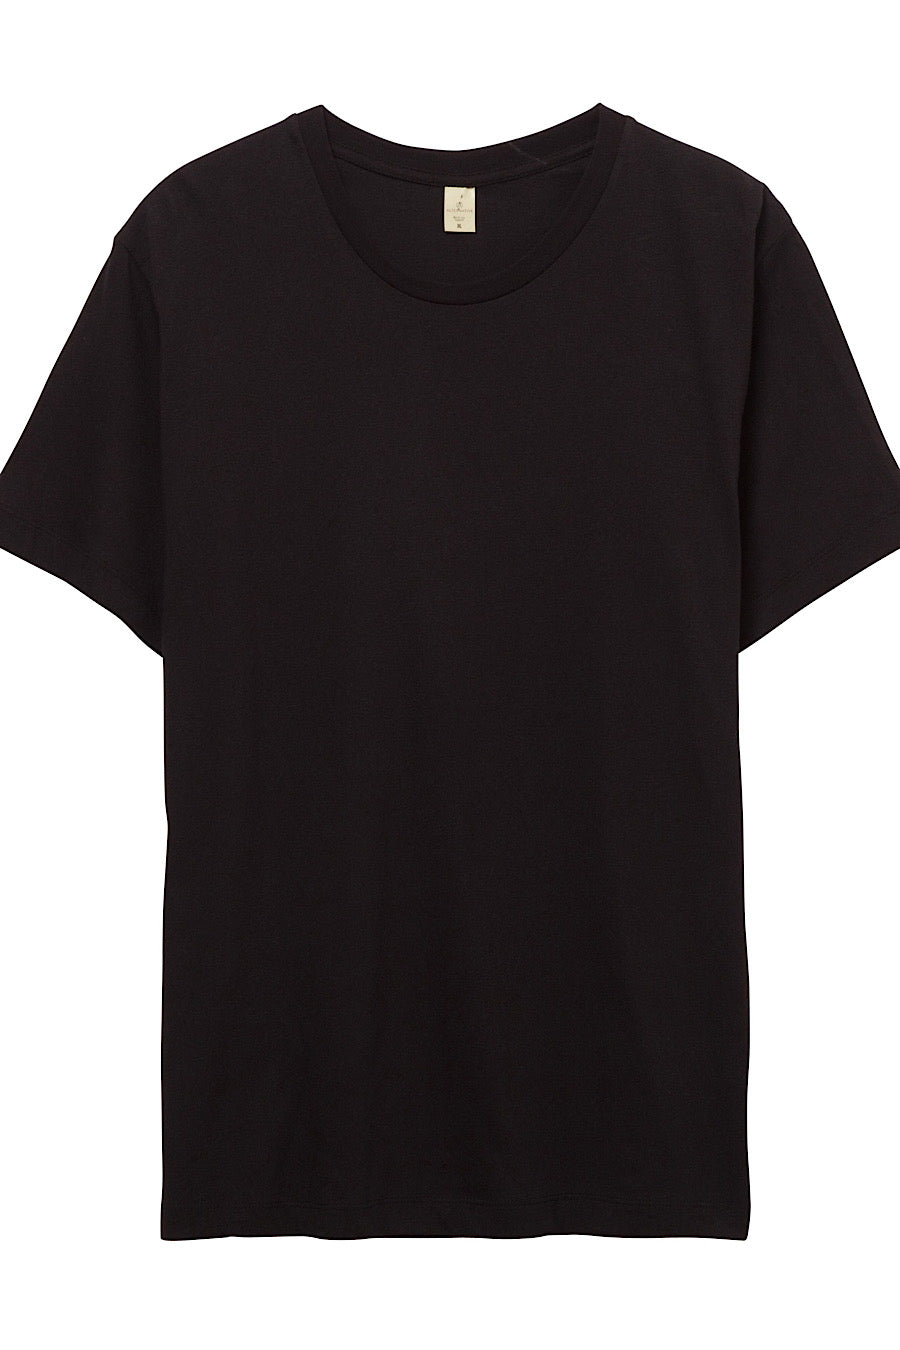 Go-To T-Shirt in Black